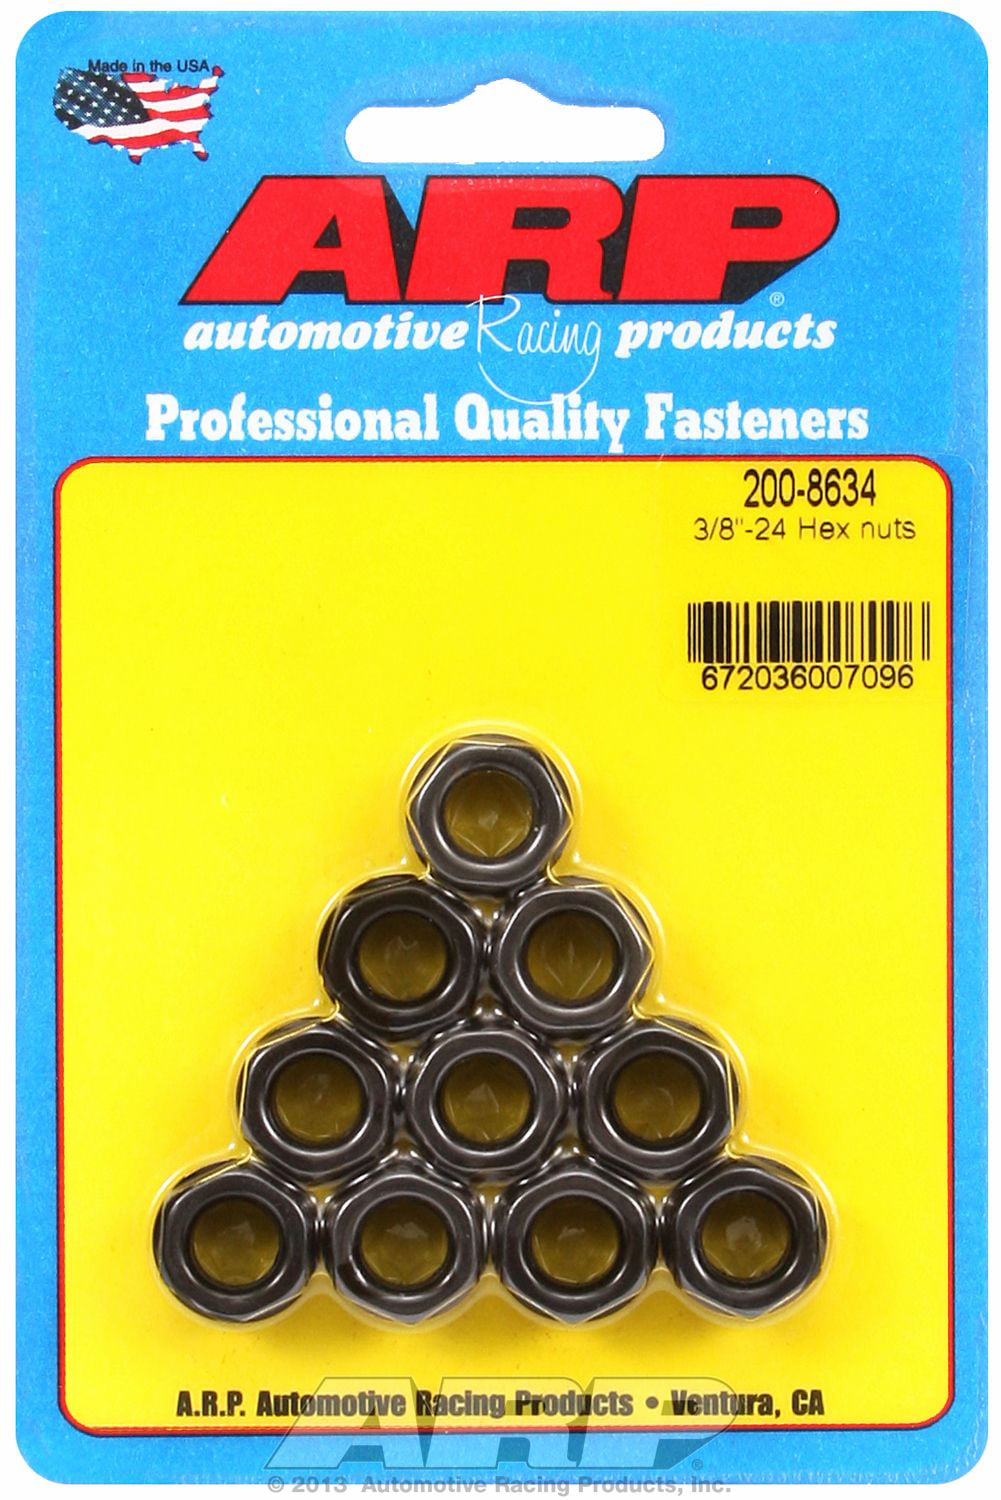 1/2-13 National Coarse Grade 8 Hex Nuts Zinv & Yellow Dichromate 100 count 